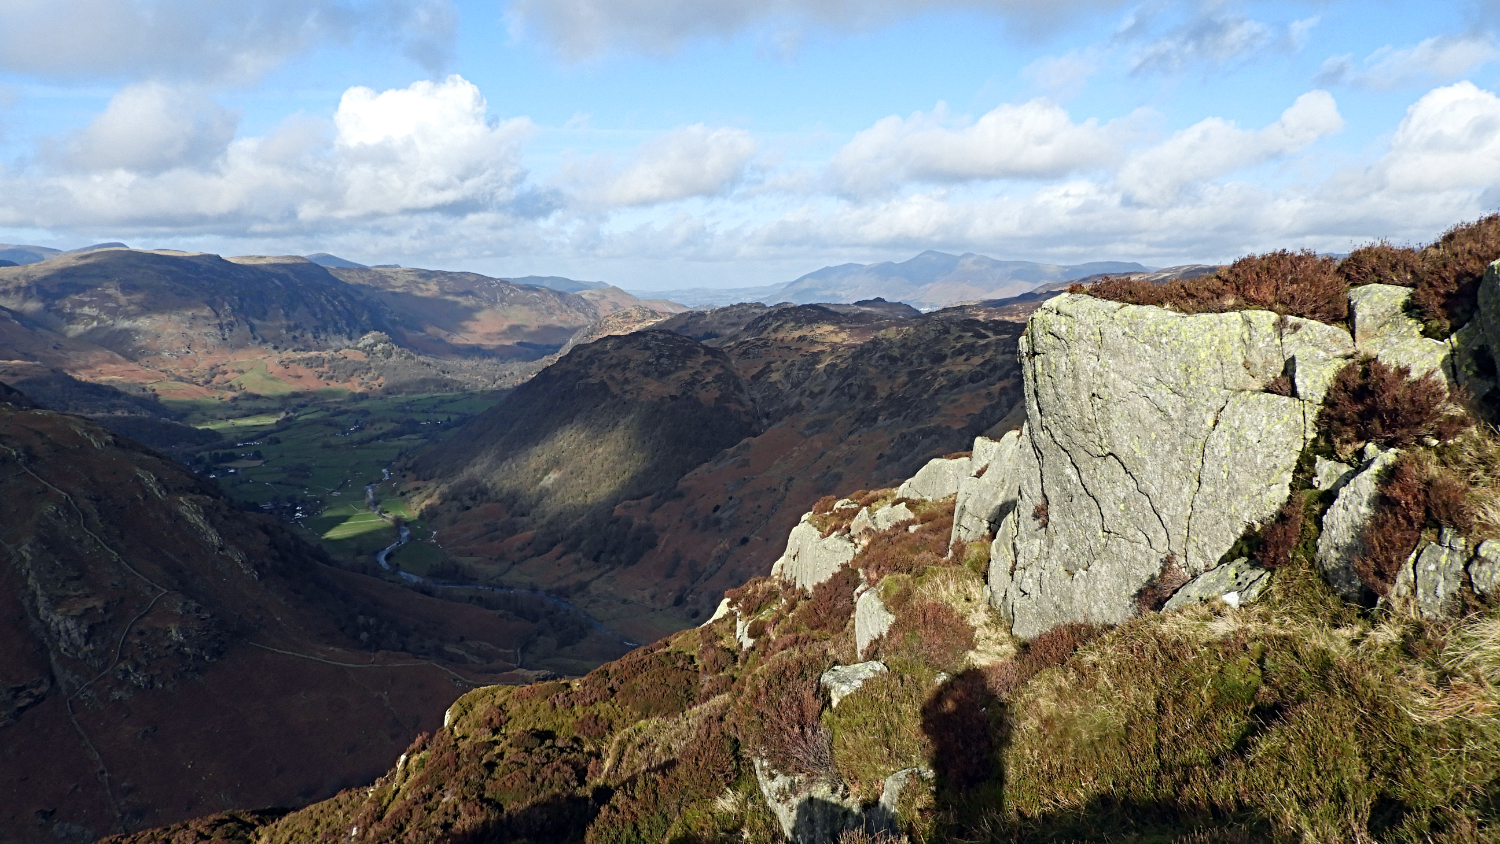 The view from Eagle Crag to Stonethwaite valley